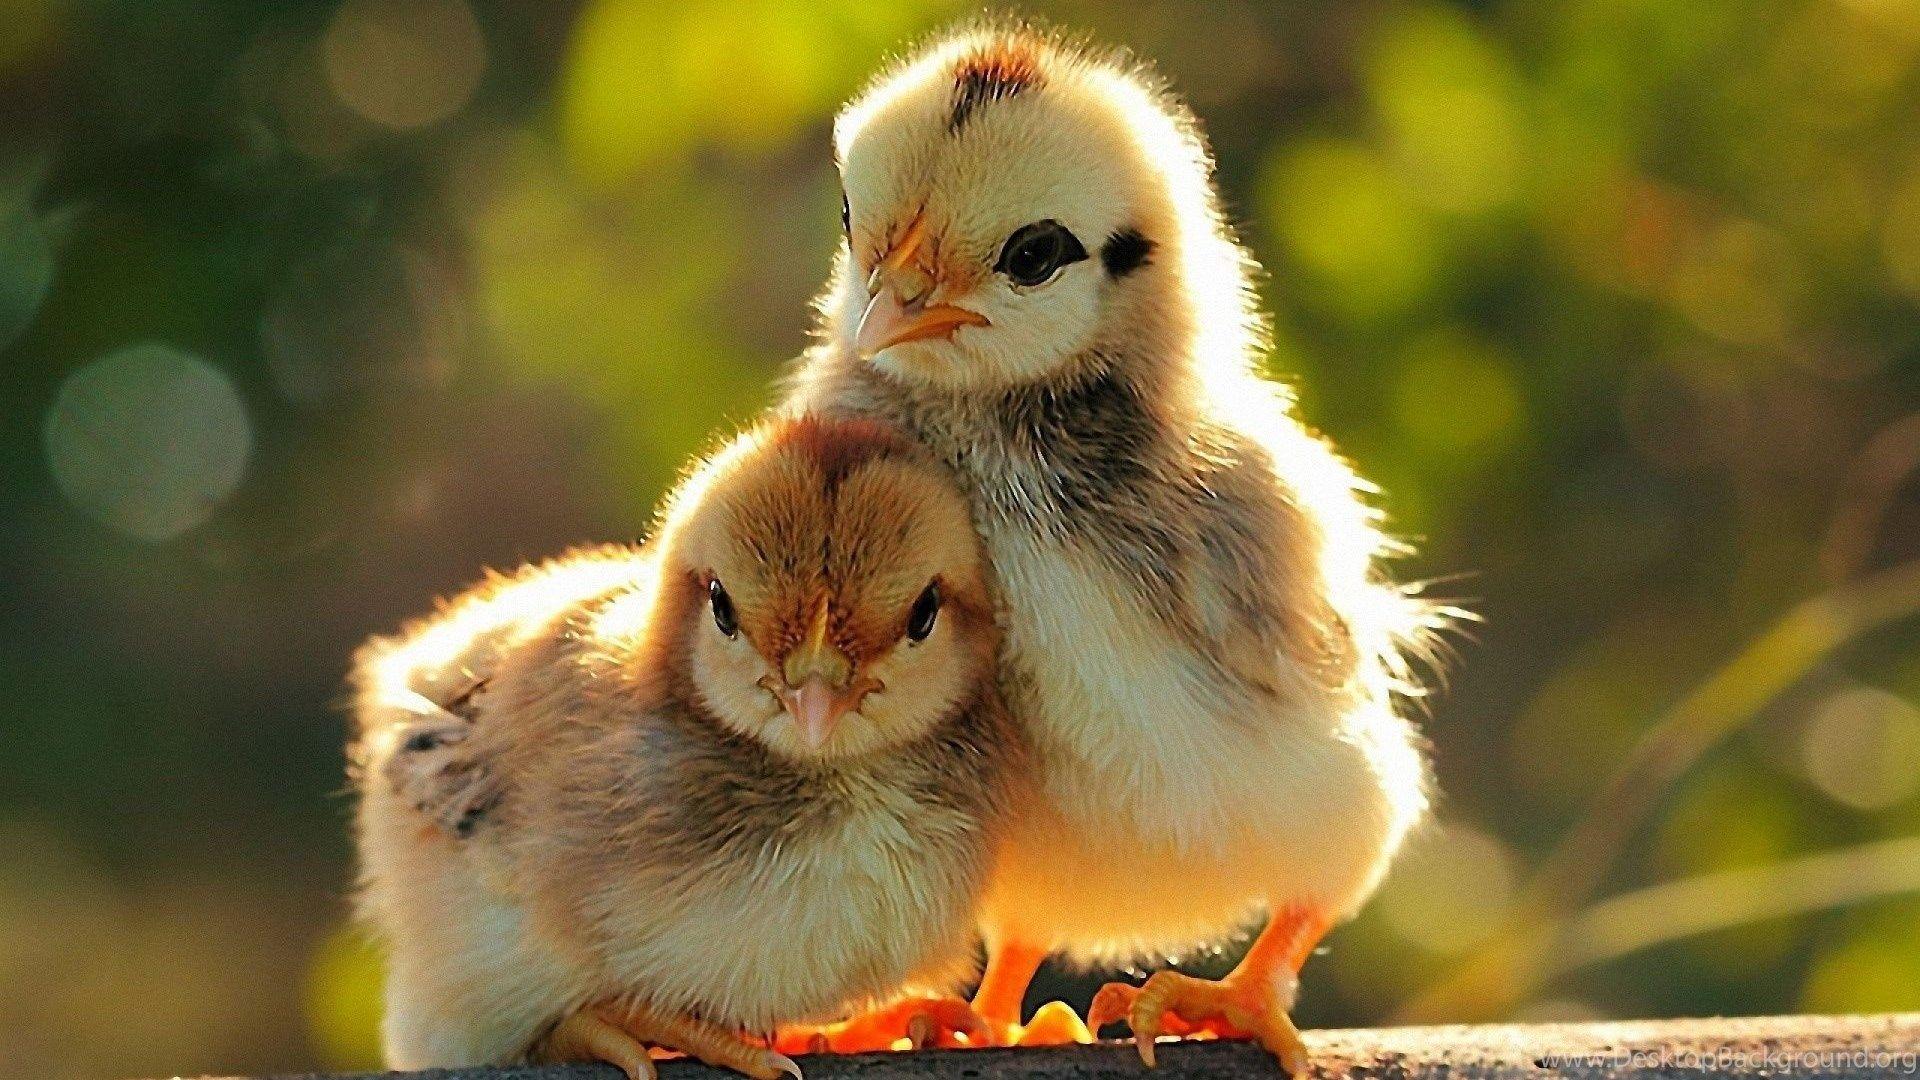 Pics, Facts, Funny Stuff About Animals & Nature Chicken Wallpaper